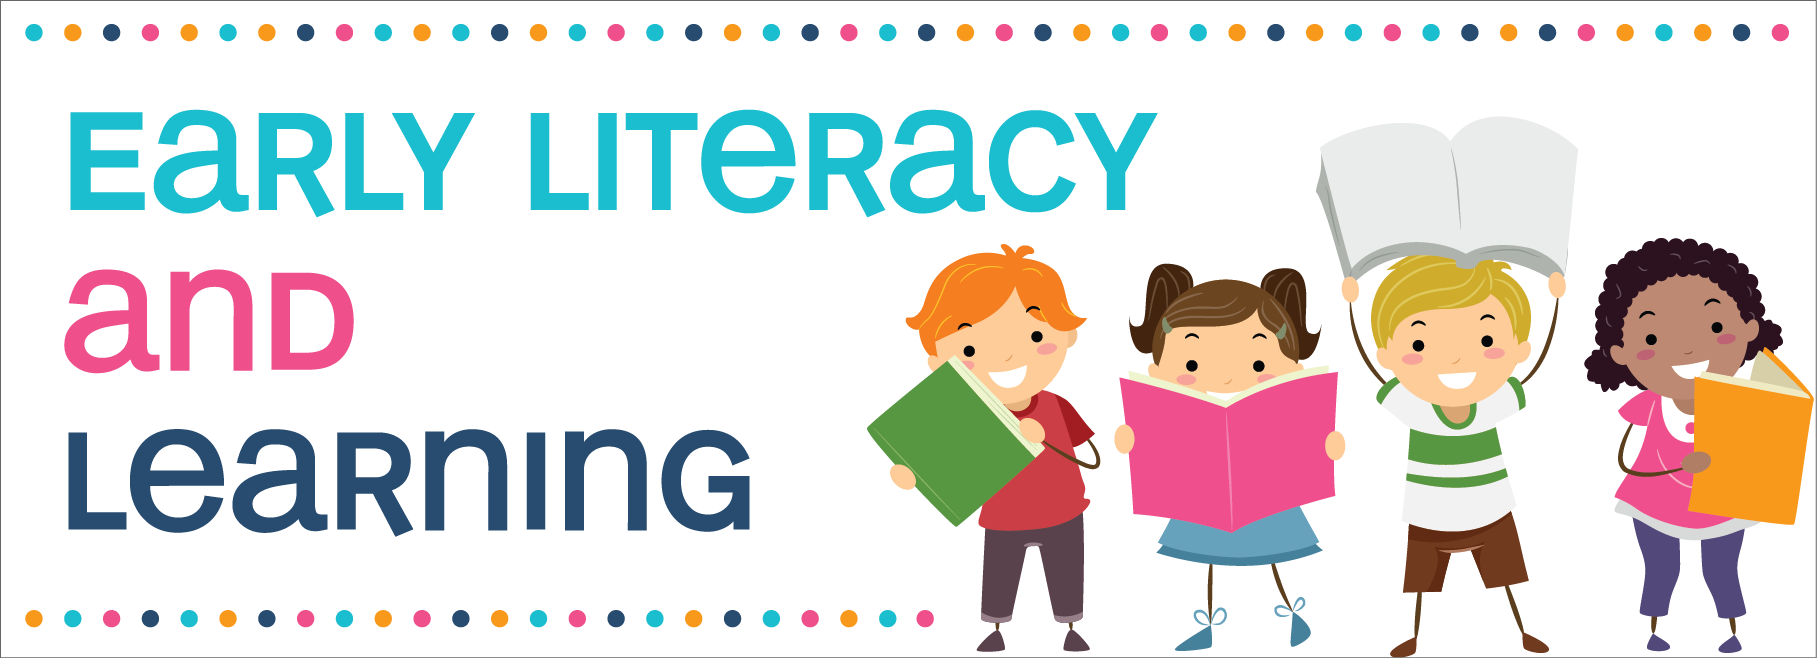 Early Literacy and learning